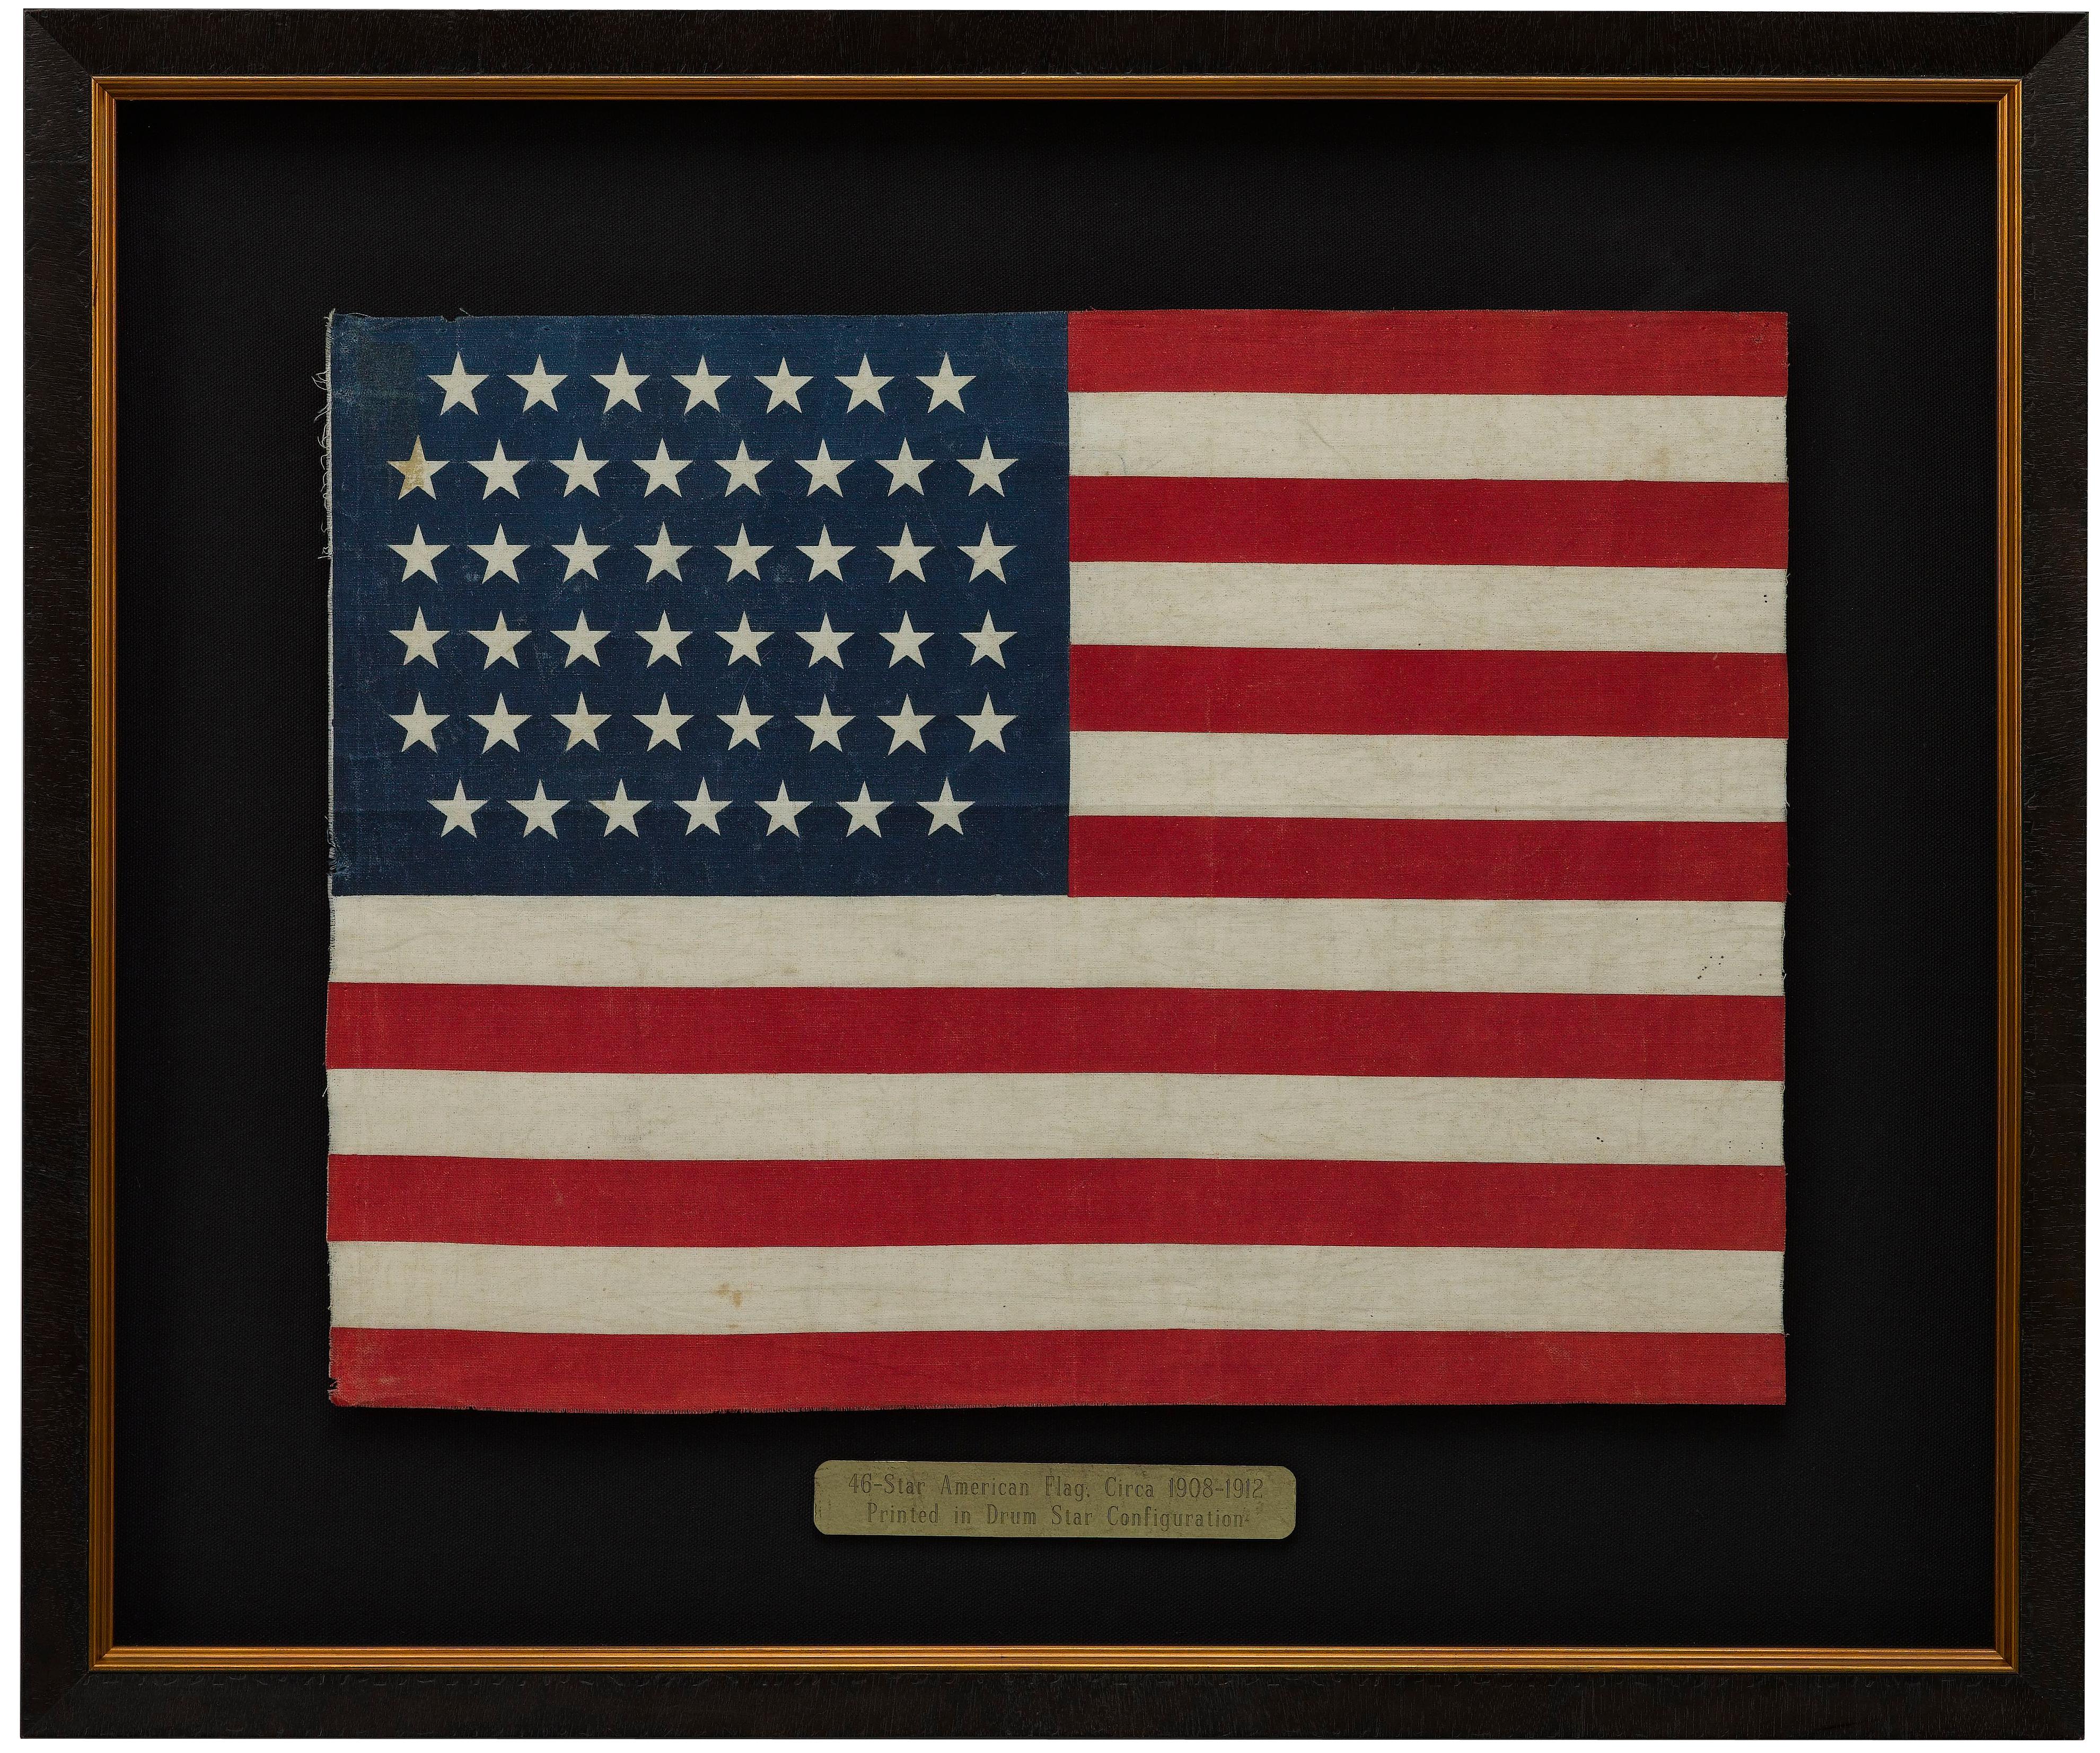 This is an original 46-Star American parade flag, celebrating Oklahoma statehood. Each star on the flag's canton represents a state in the Union at the time. The official flag design would update every July 4th, to include any new states added to